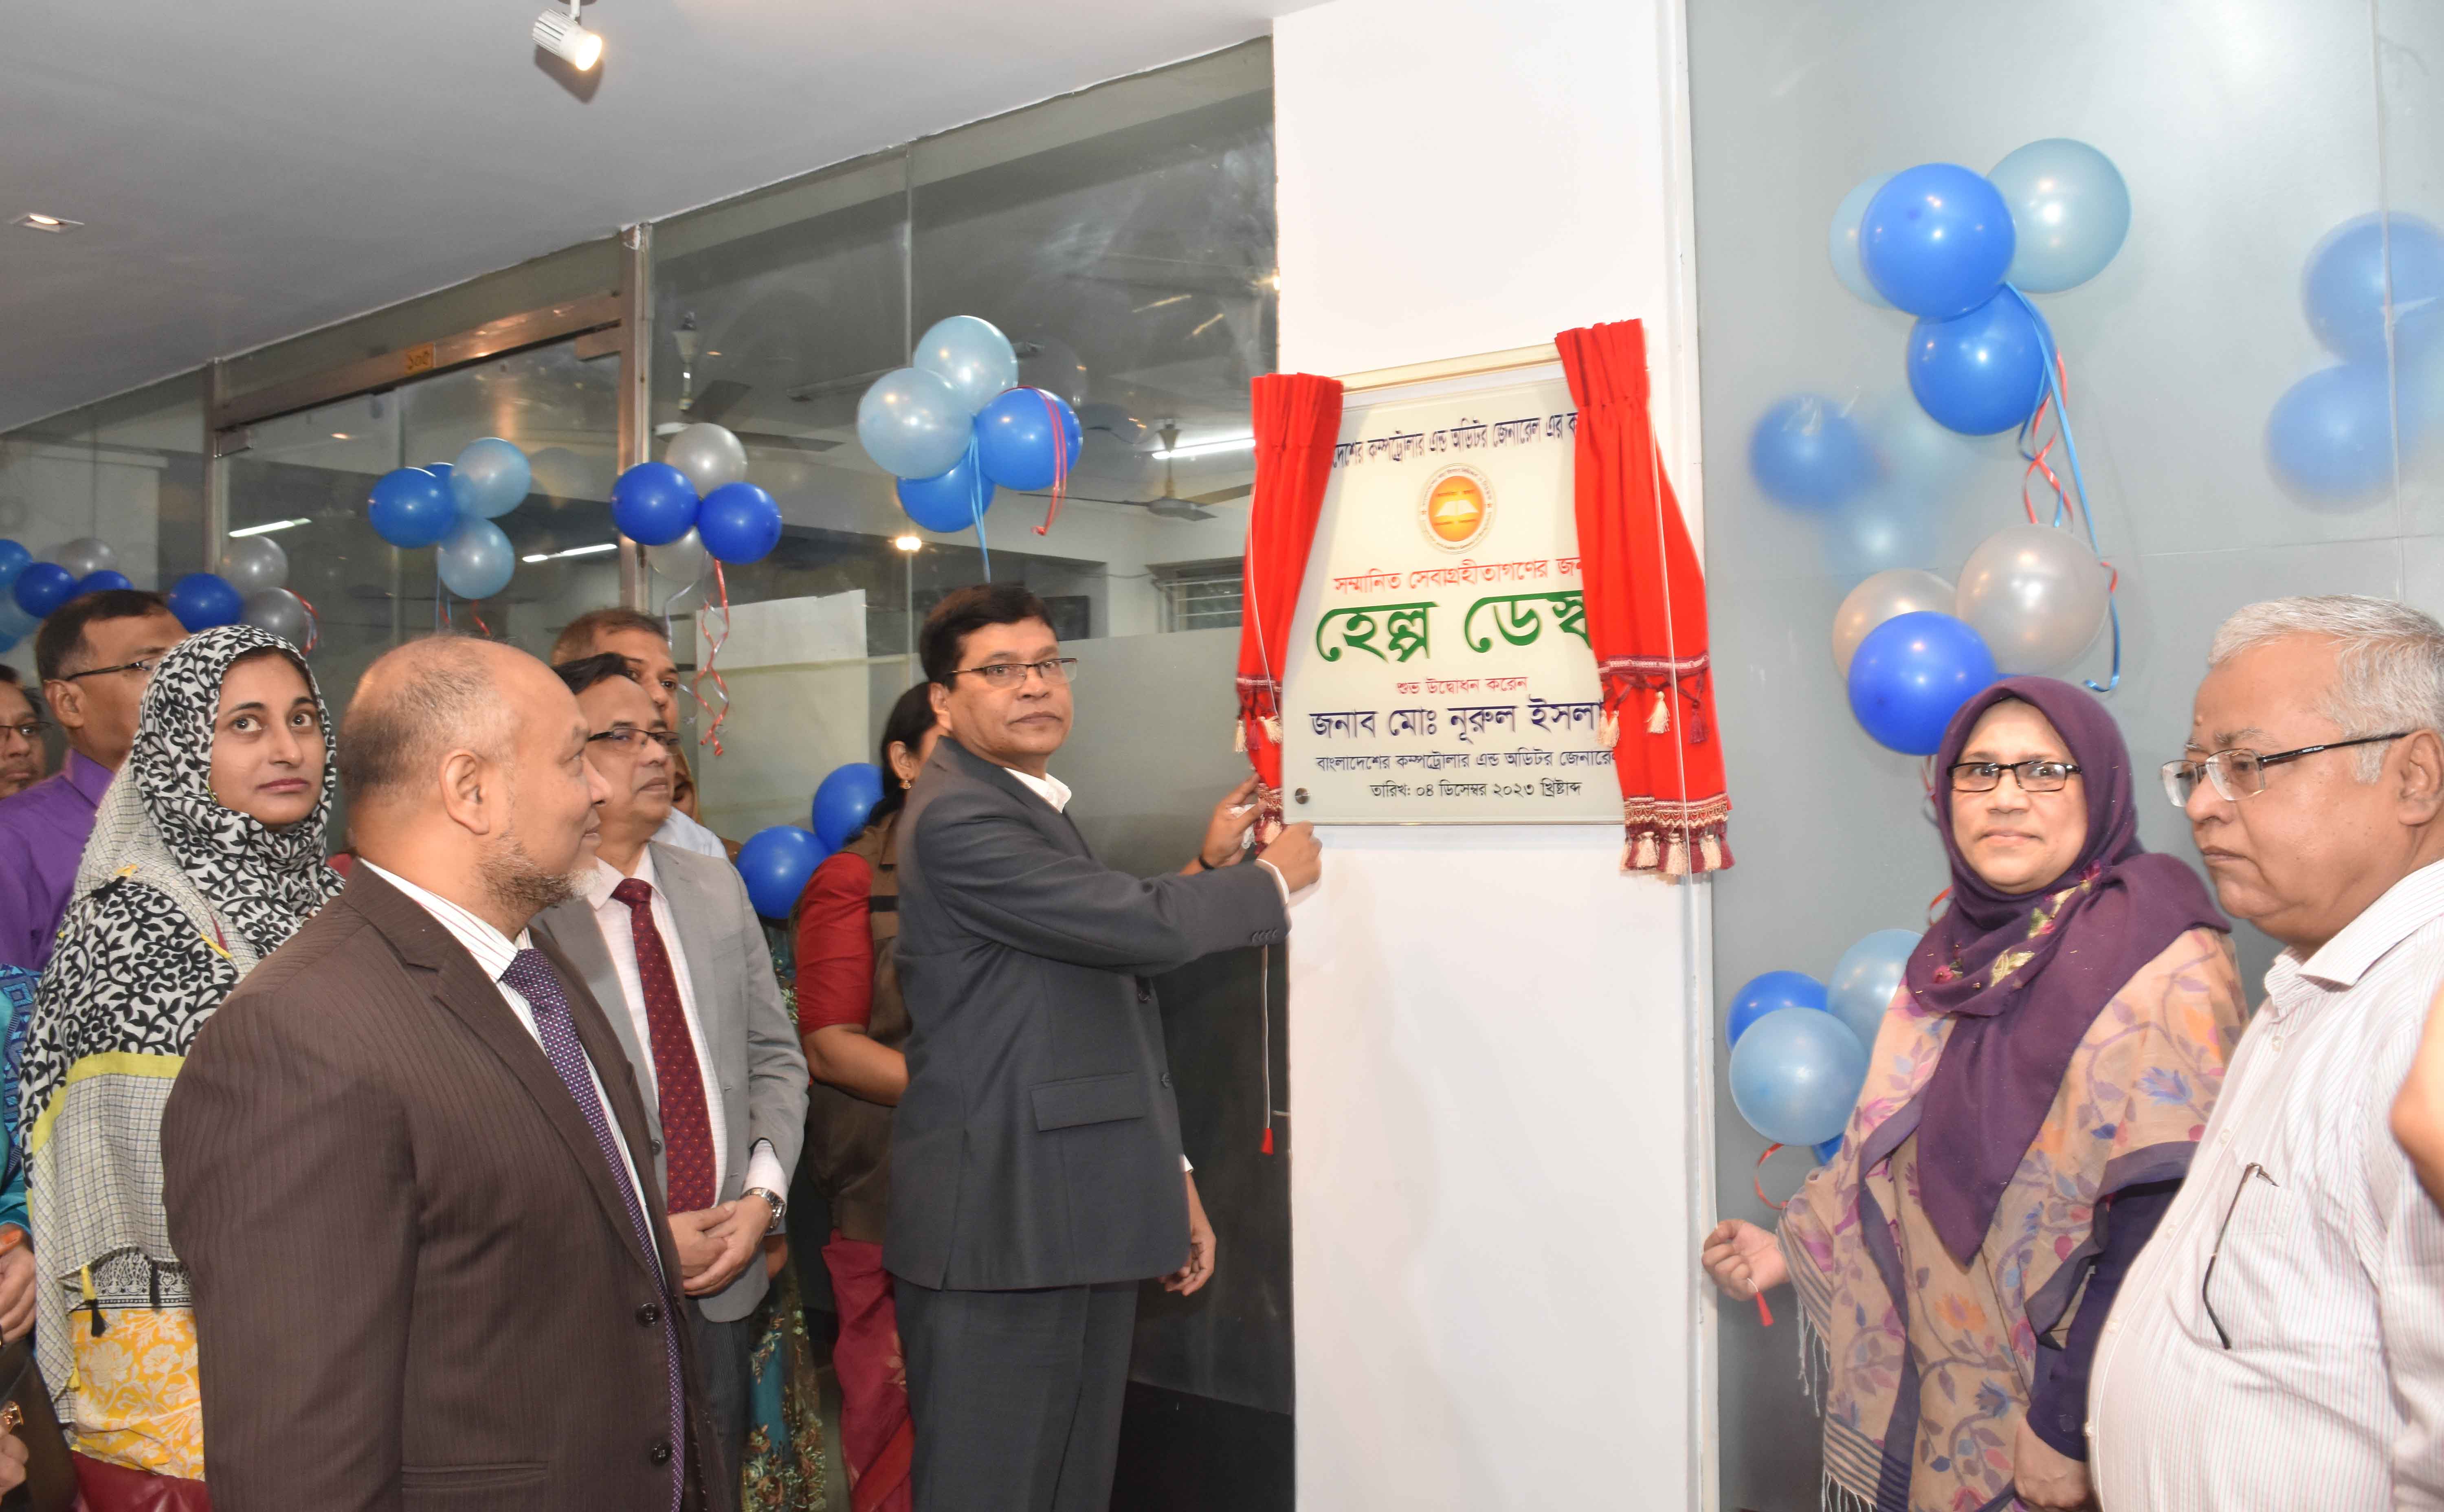 Honorable Comptroller and Auditor General of Bangladesh Mr. Md. Nurul Islam inaugurated the help desk for the respected service recipients.